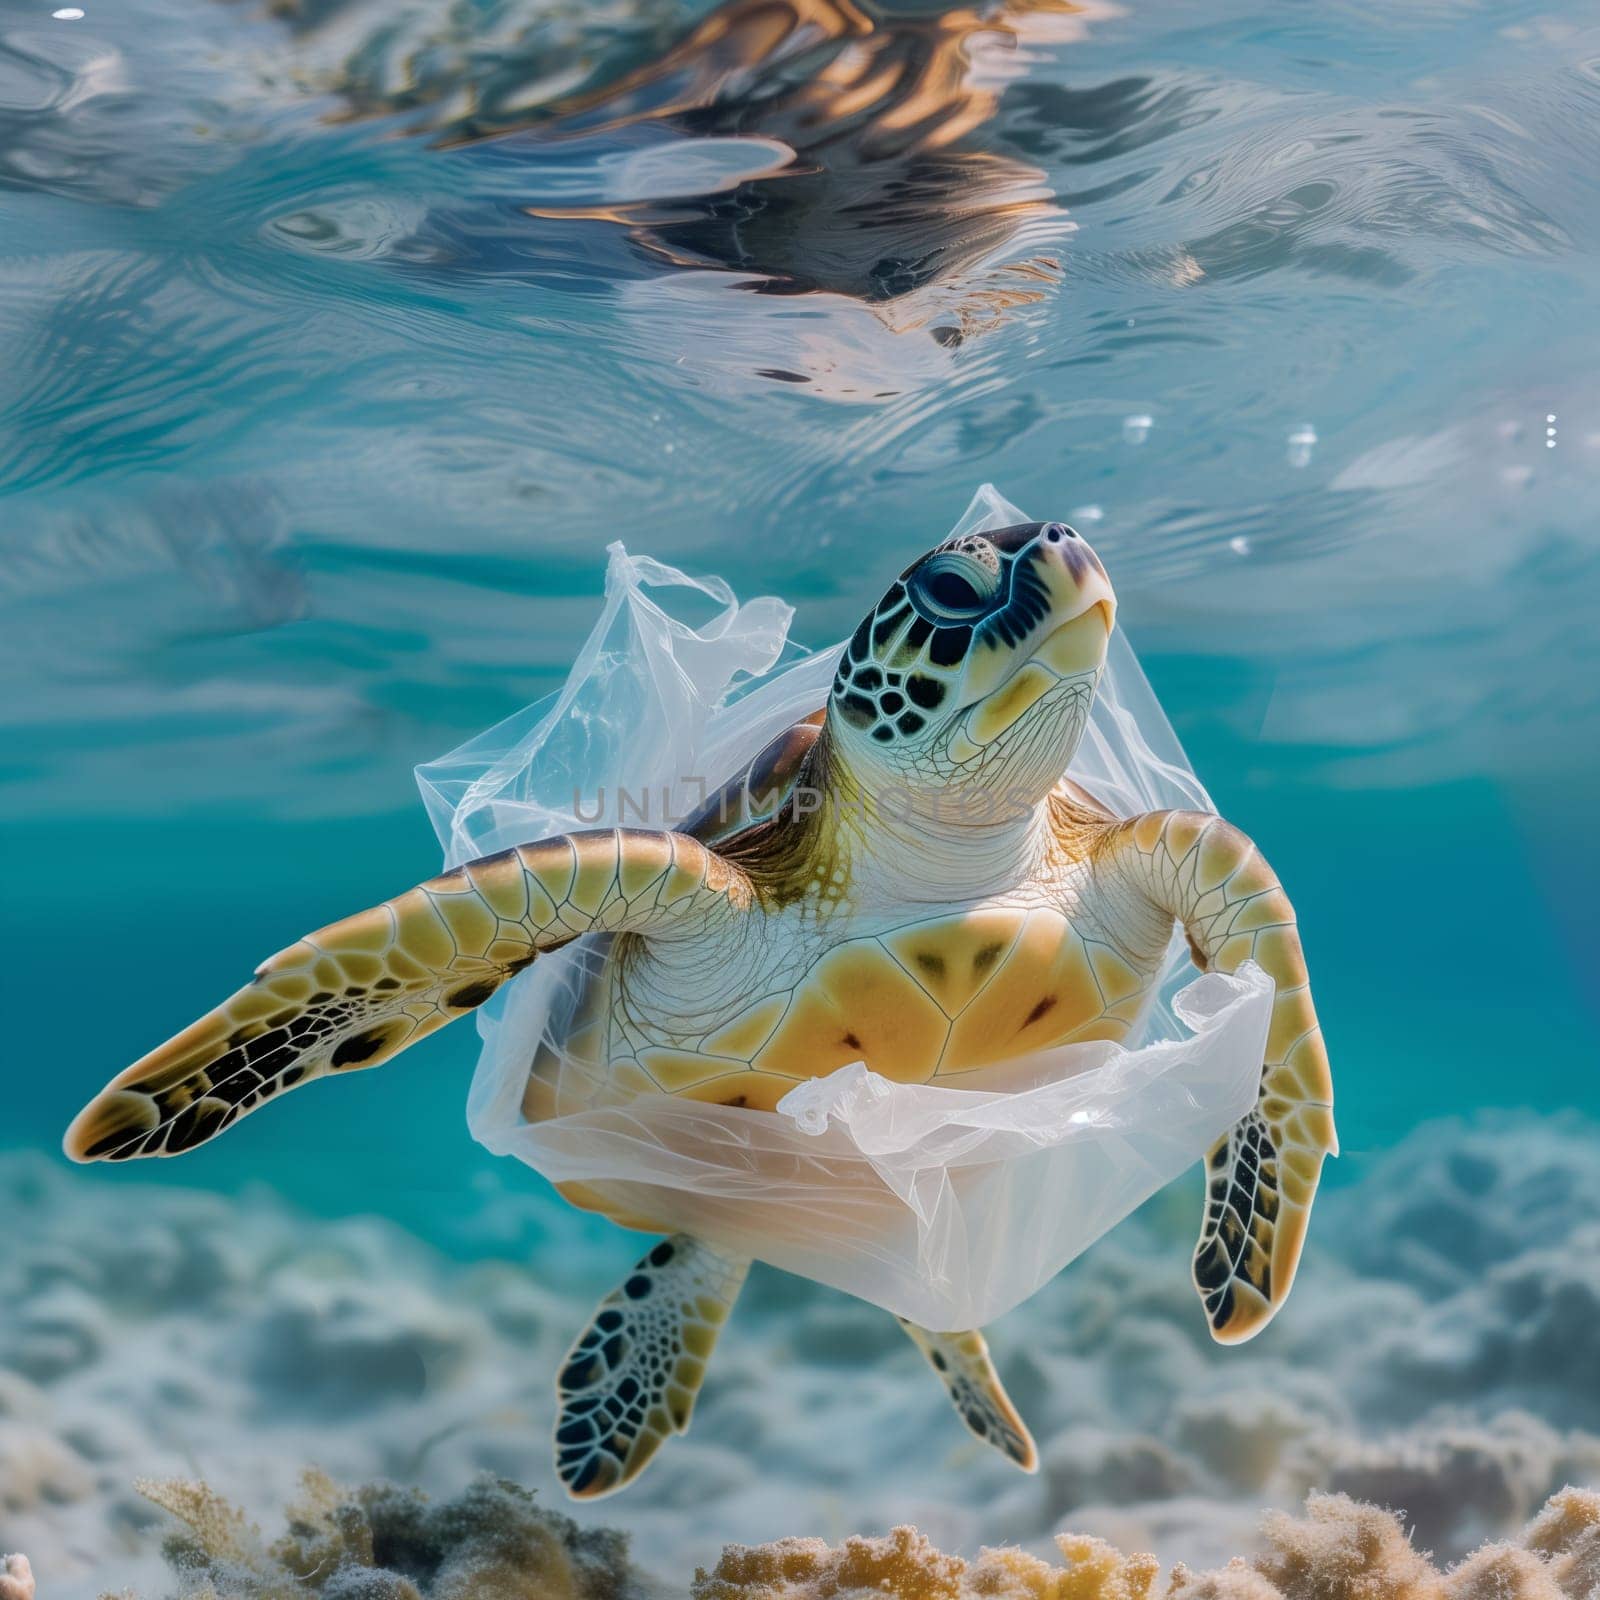 Turtle with plastic debris on its shell in the sea. by Nataliya